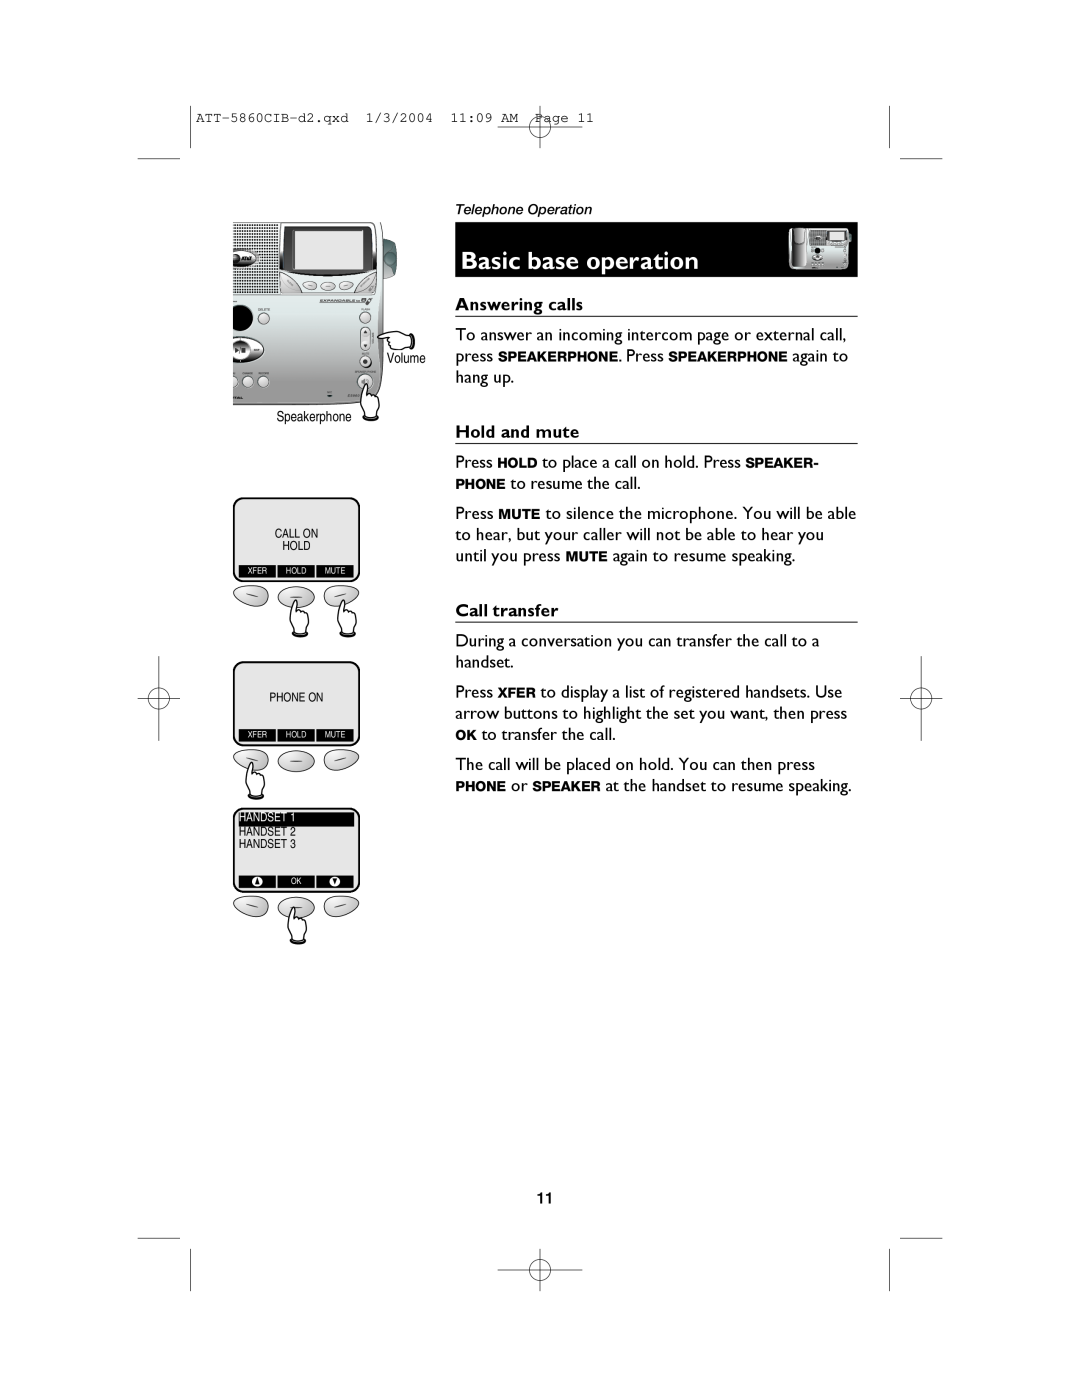 AT&T E5860 user manual Basic base operation, Answering calls, Hold and mute, Call transfer 